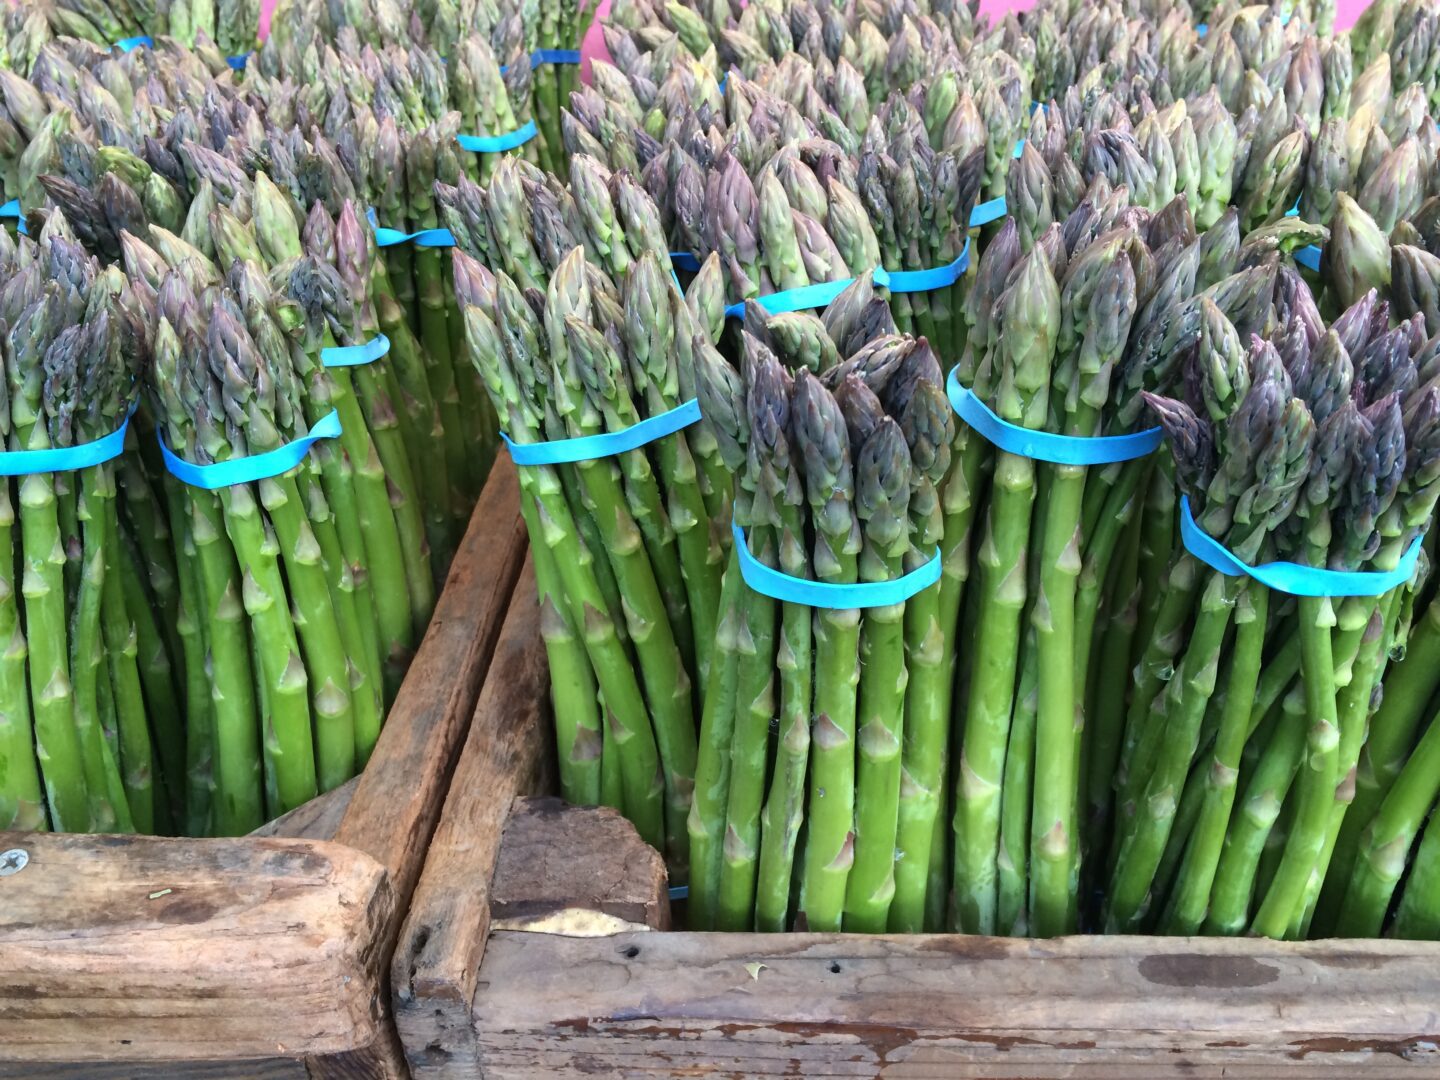 A bunch of asparagus in a wooden crate.